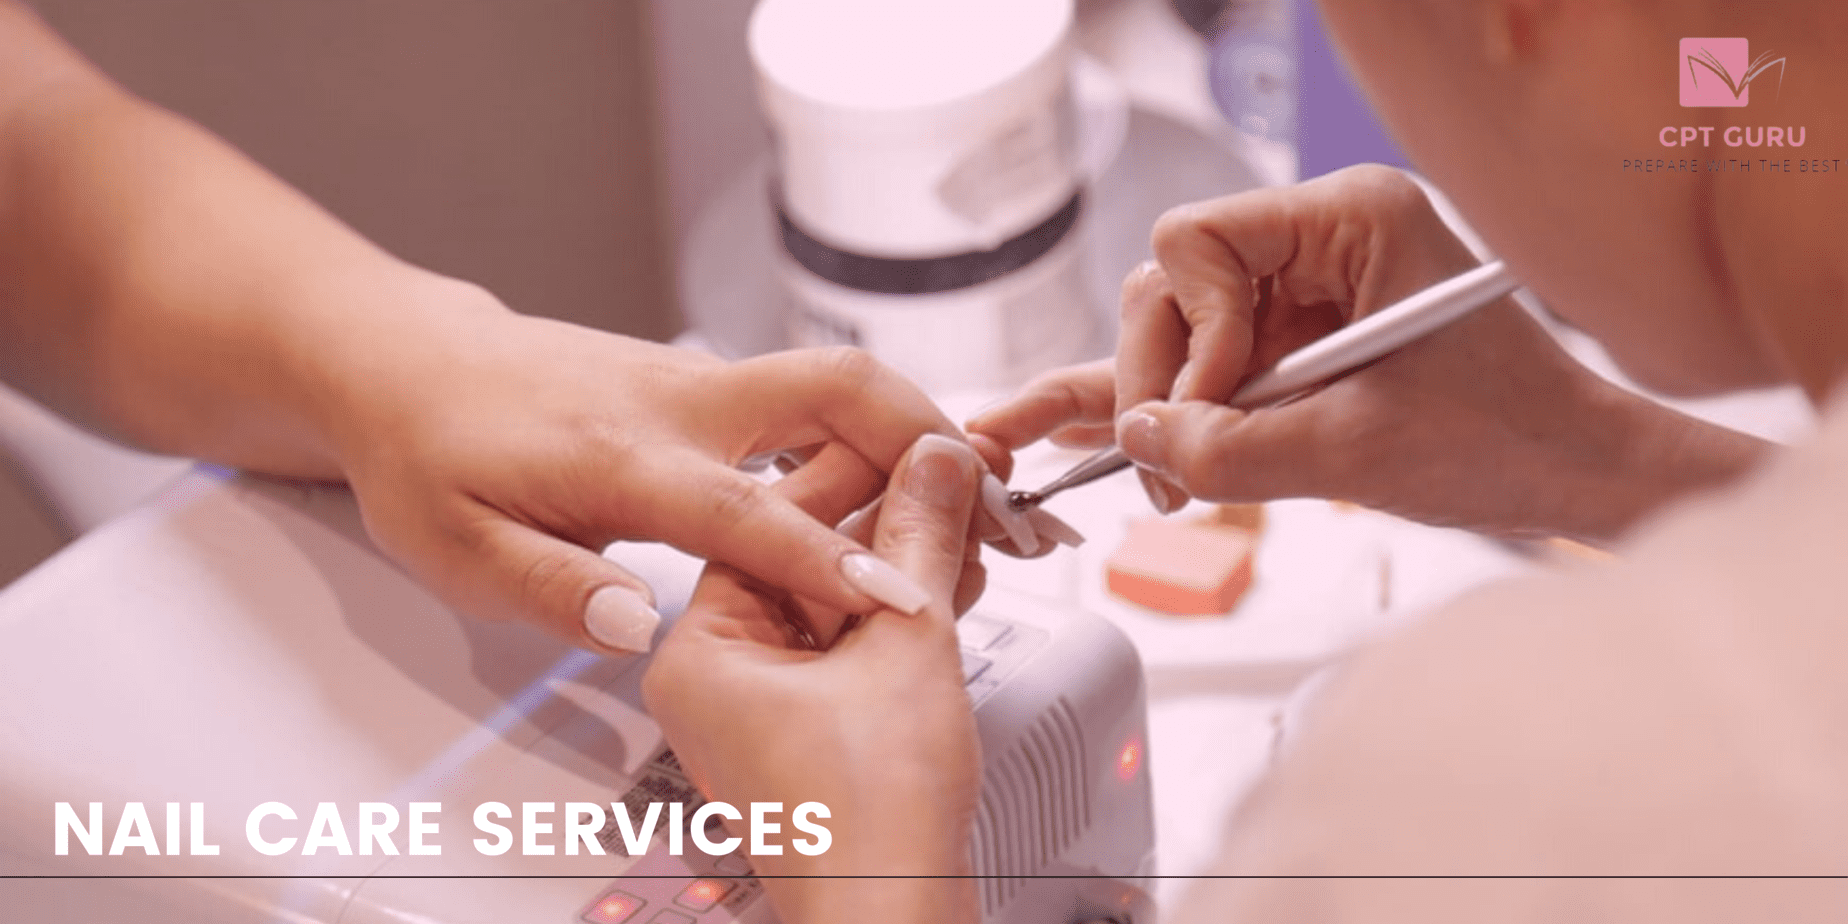 Nail care services in a beauty salon 